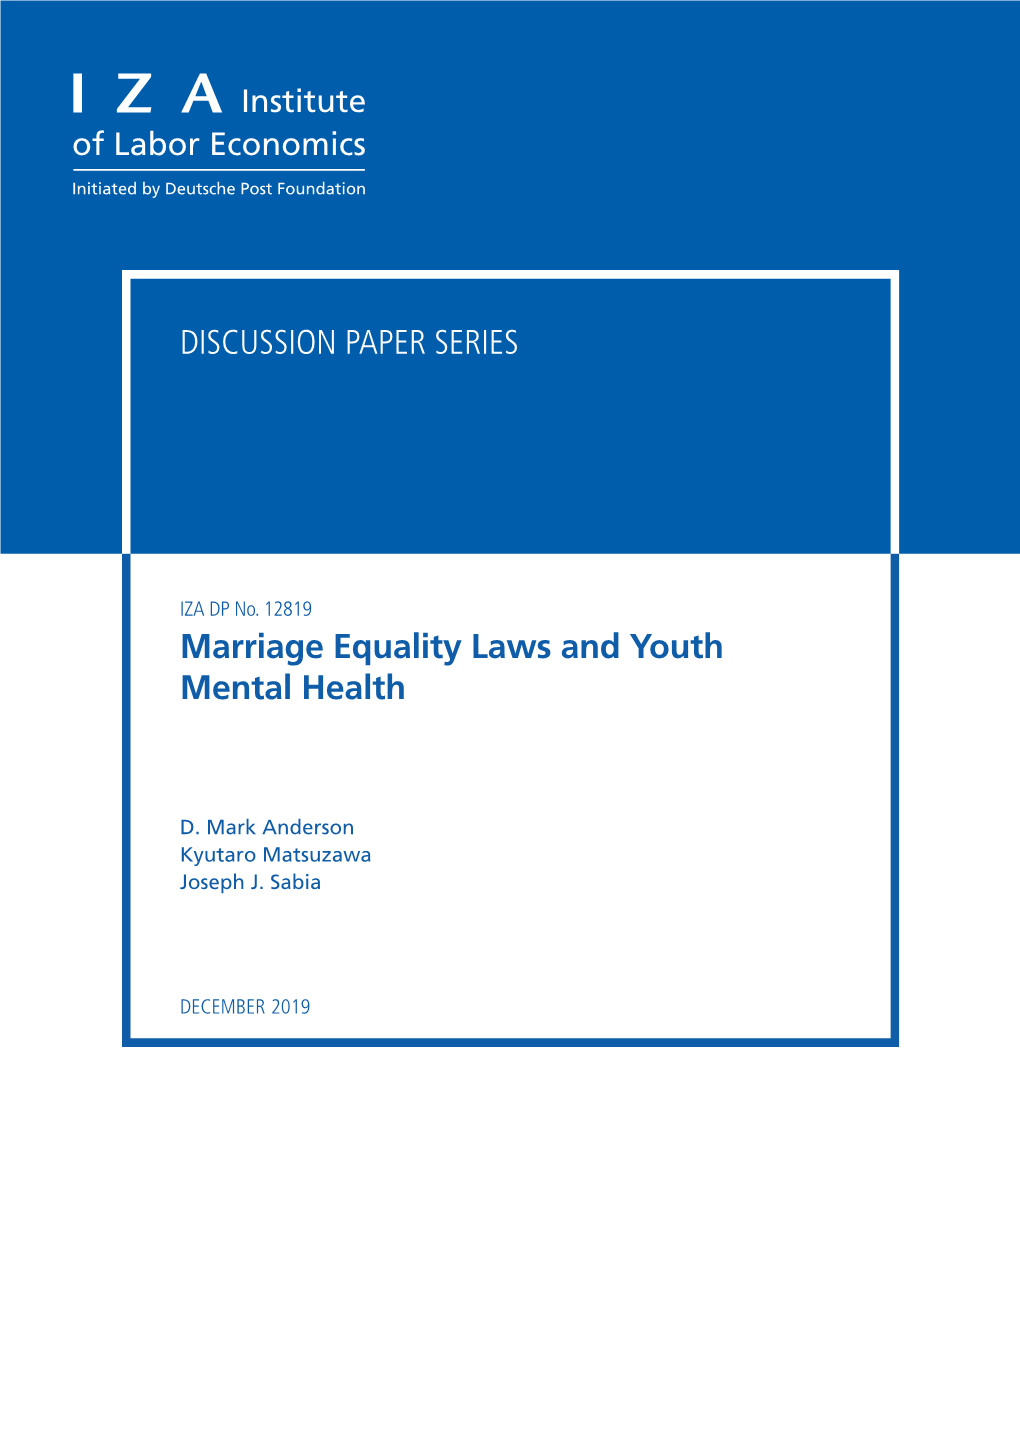 Marriage Equality Laws and Youth Mental Health